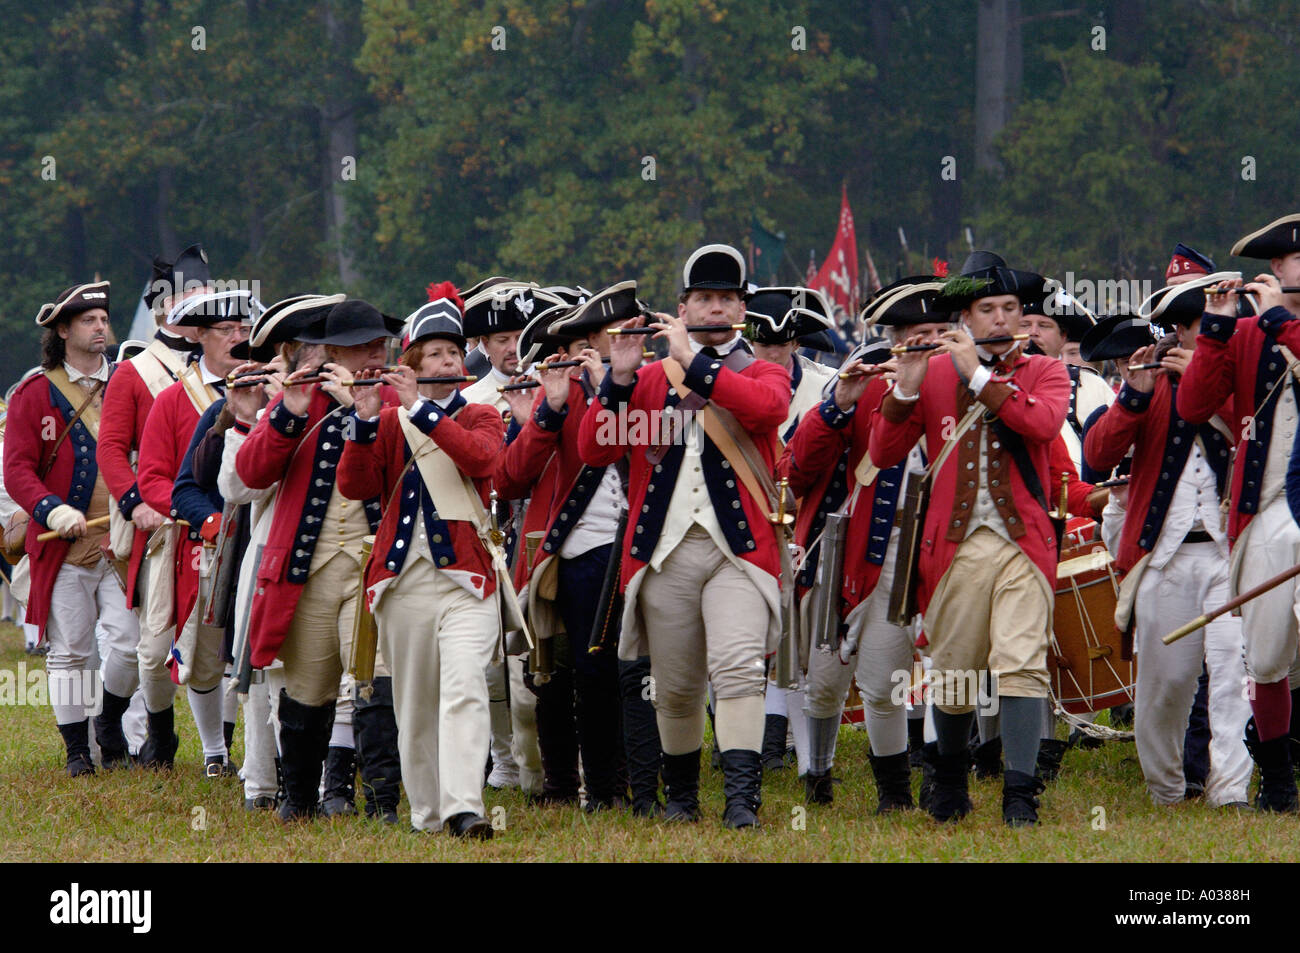 British fife and drum corps take the field in a reenactment of the surrender at Yorktown Battlefield Virginia. Digital photograph Stock Photo